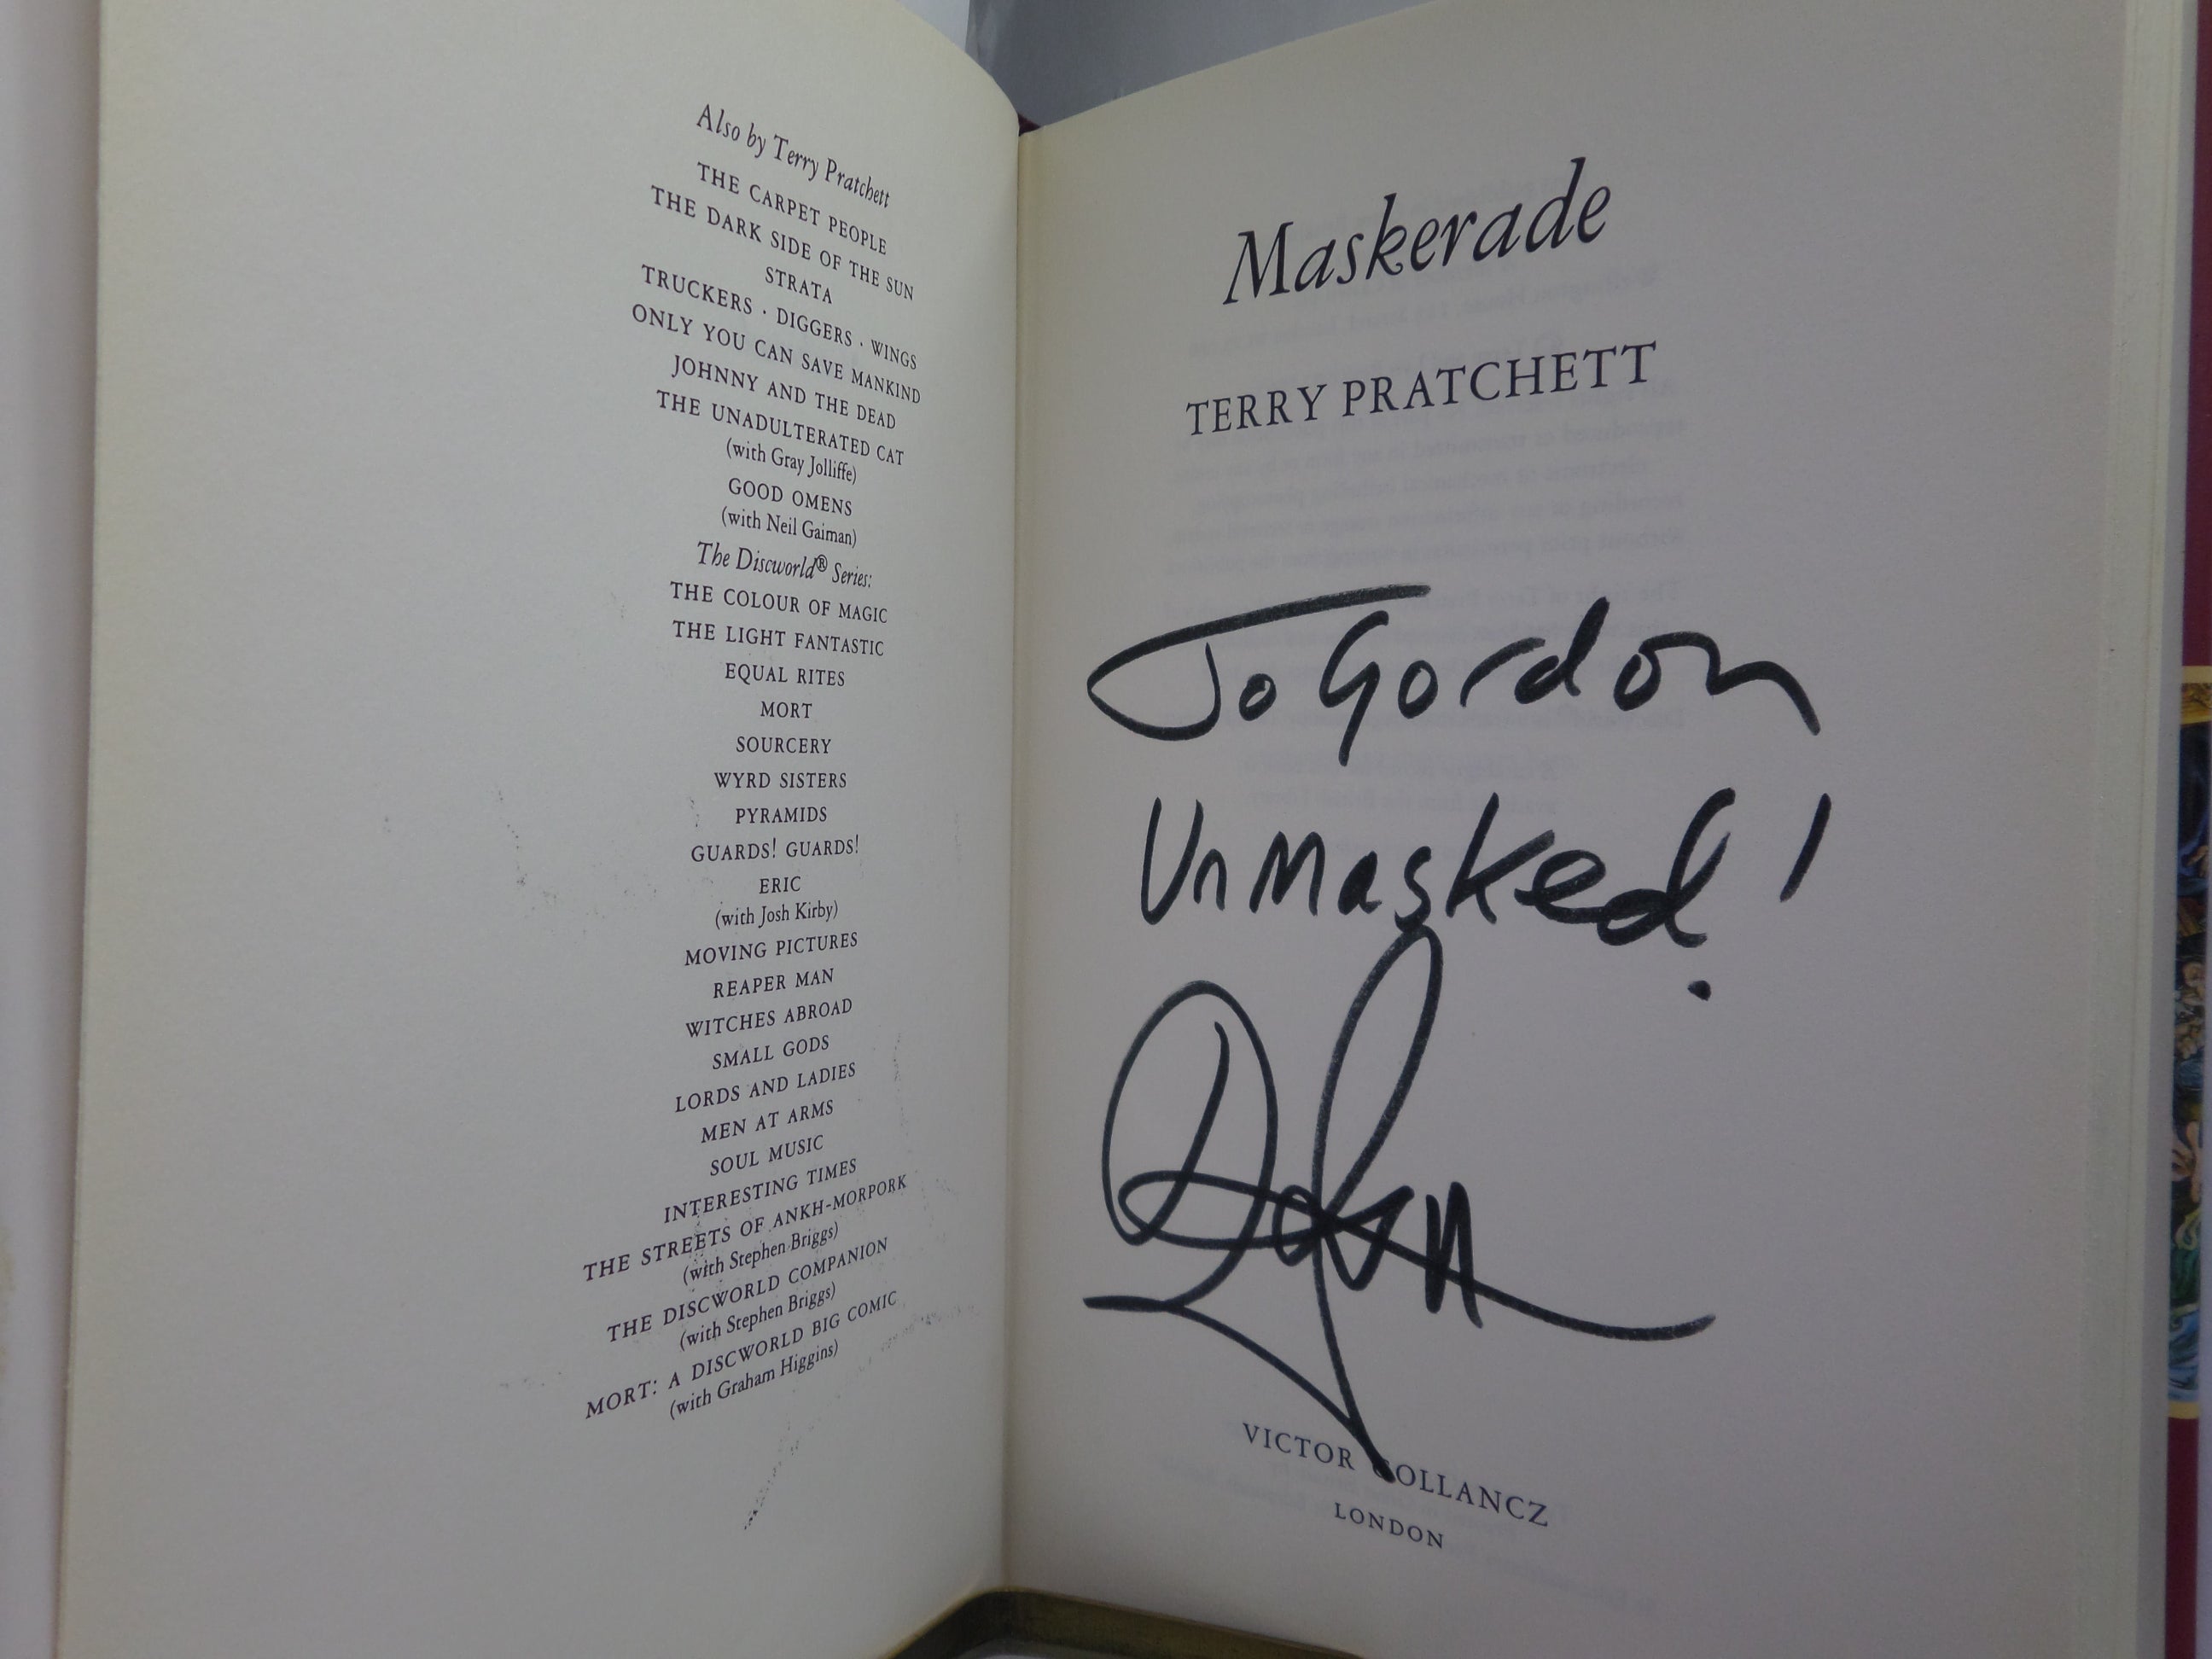 MASKERADE BY TERRY PRATCHETT 1995 SIGNED AND INSCRIBED FIRST EDITION [HARDBACK]